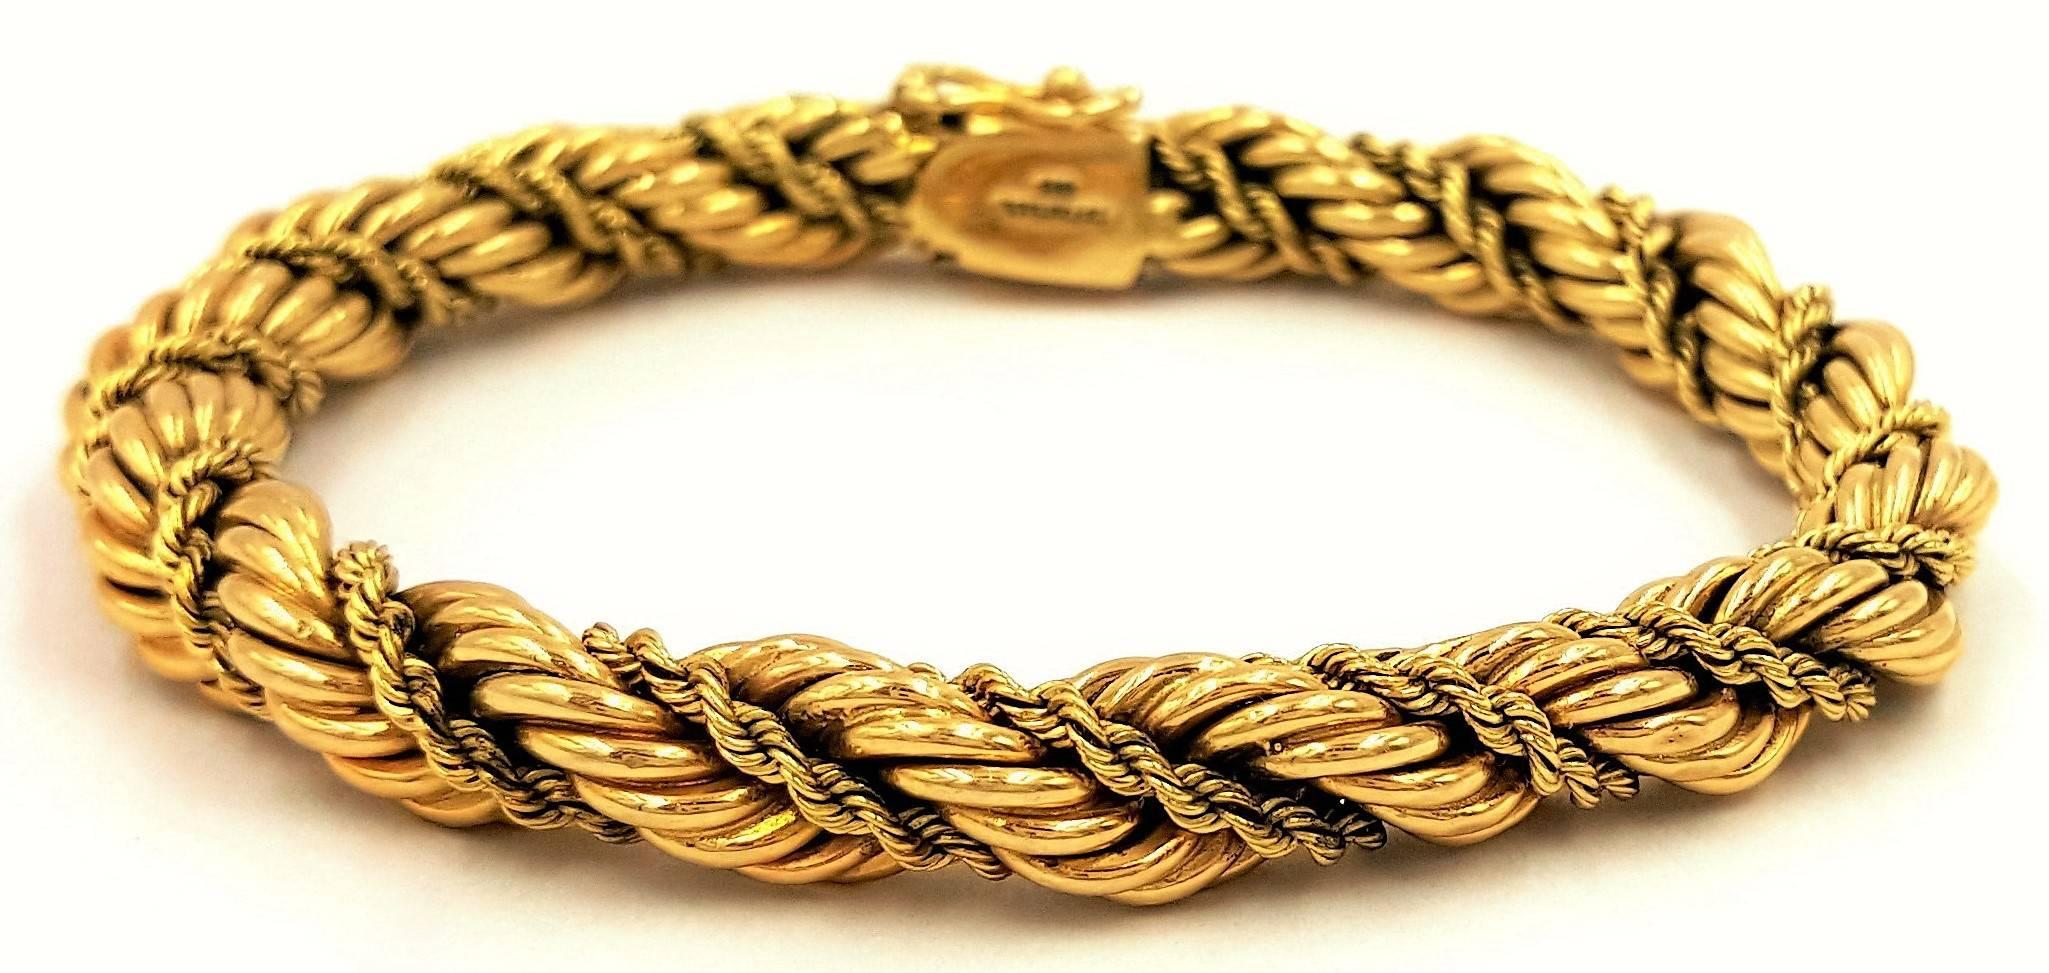 Tiffany & Co. Golden Light Collection Twisted Gold Rope Bracelet In Excellent Condition For Sale In Scottsdale, AZ